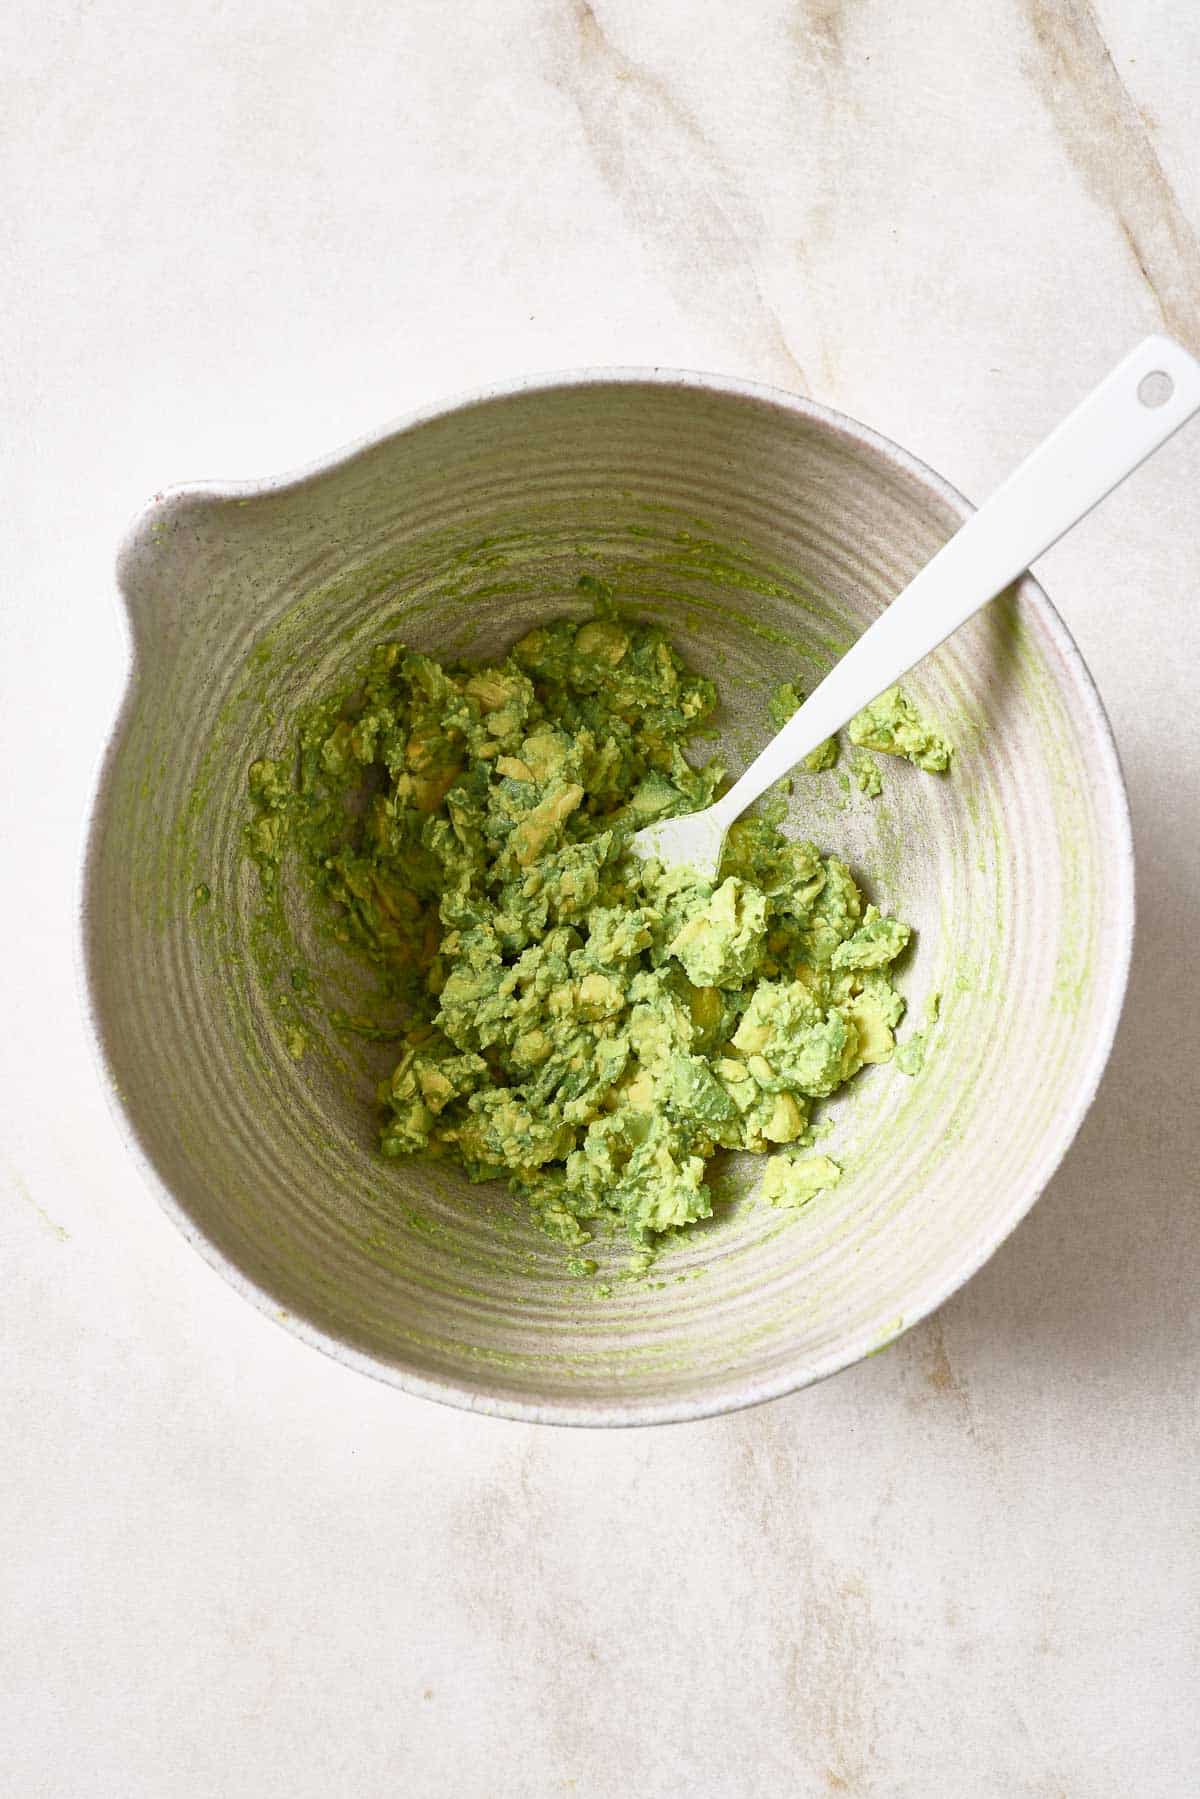 Mashed avocados in a white bowl with a spoon.